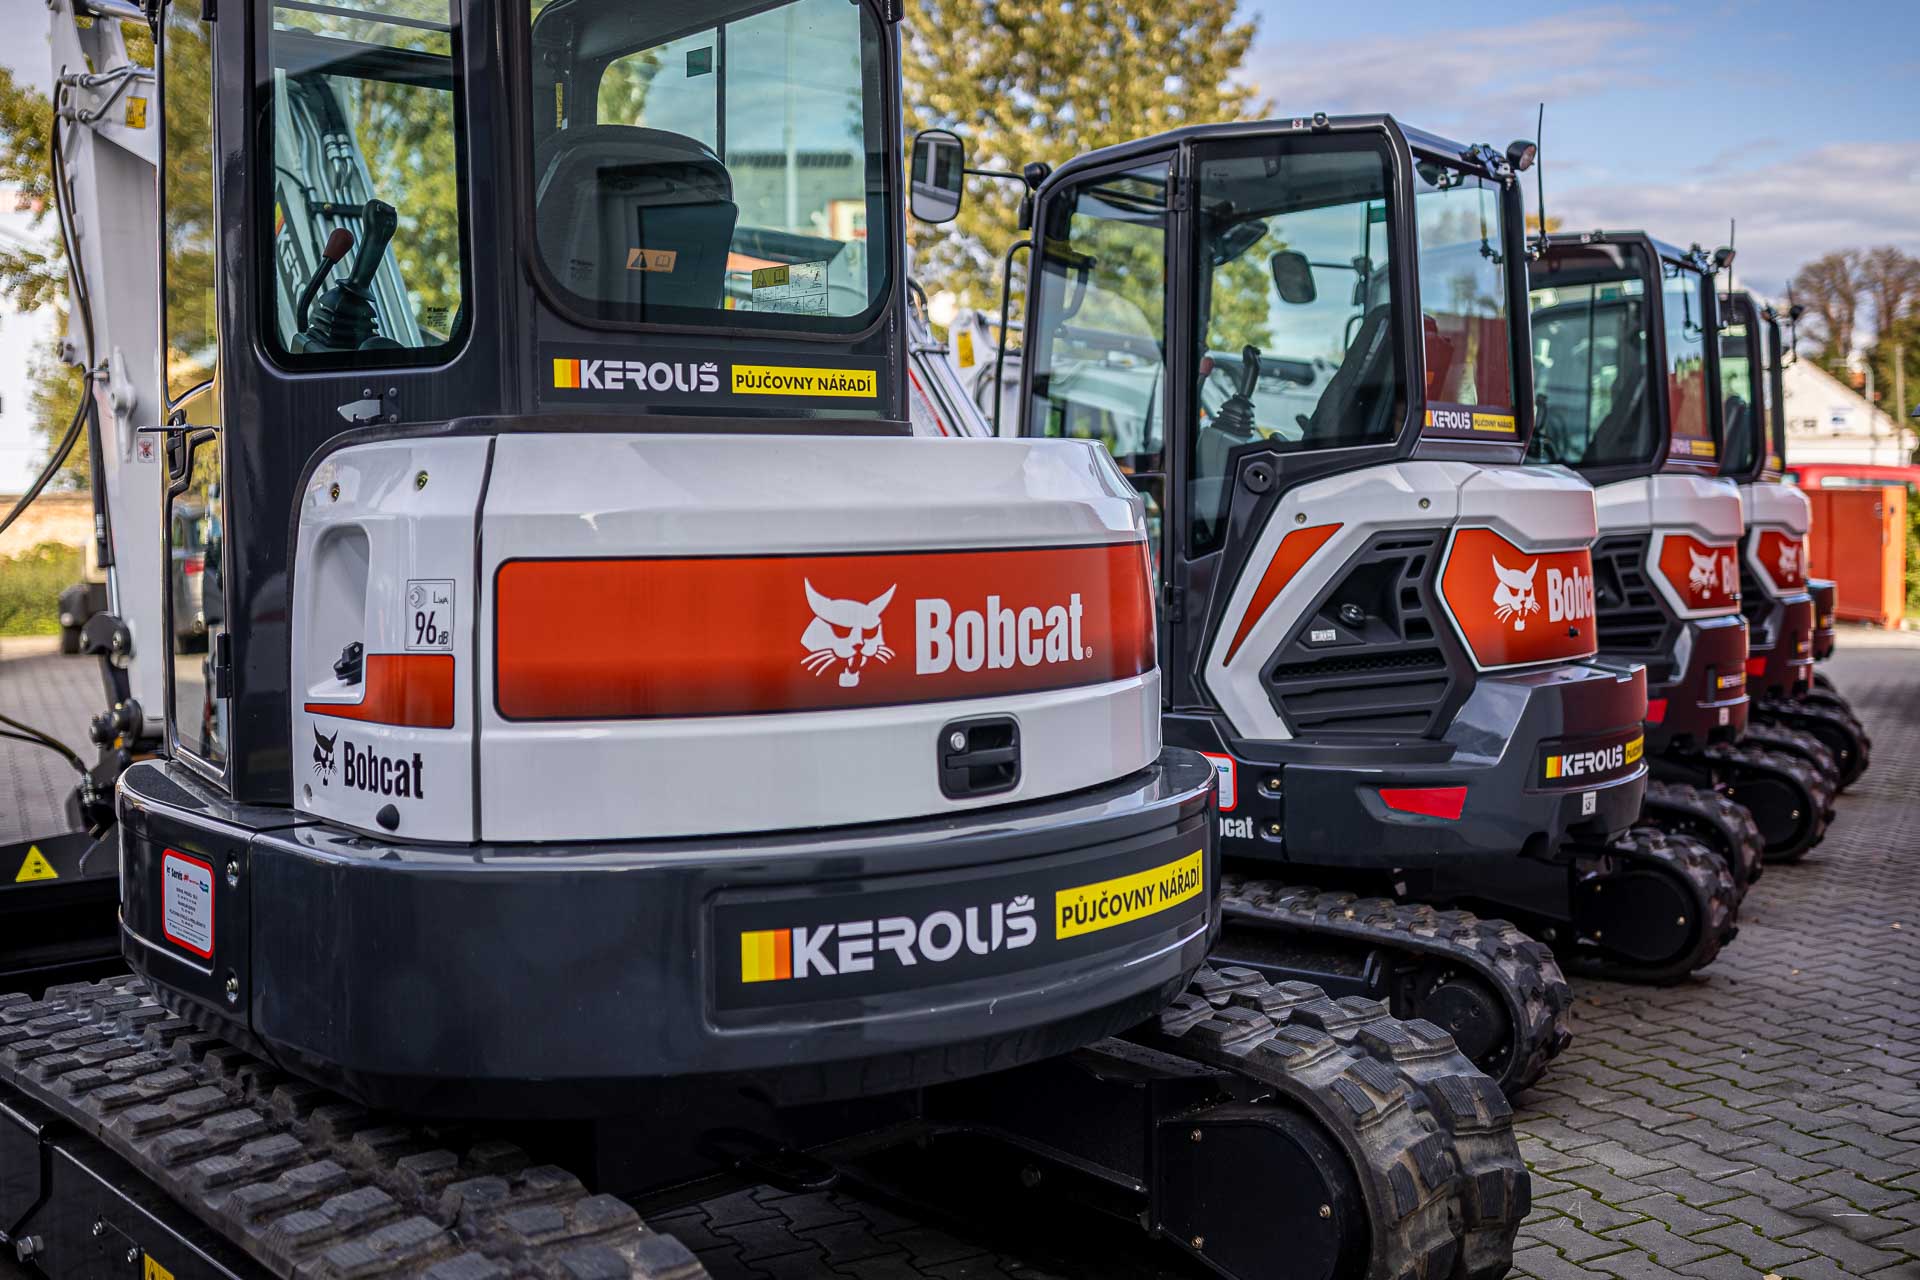 More Success for Bobcat in the Czech Rental Market